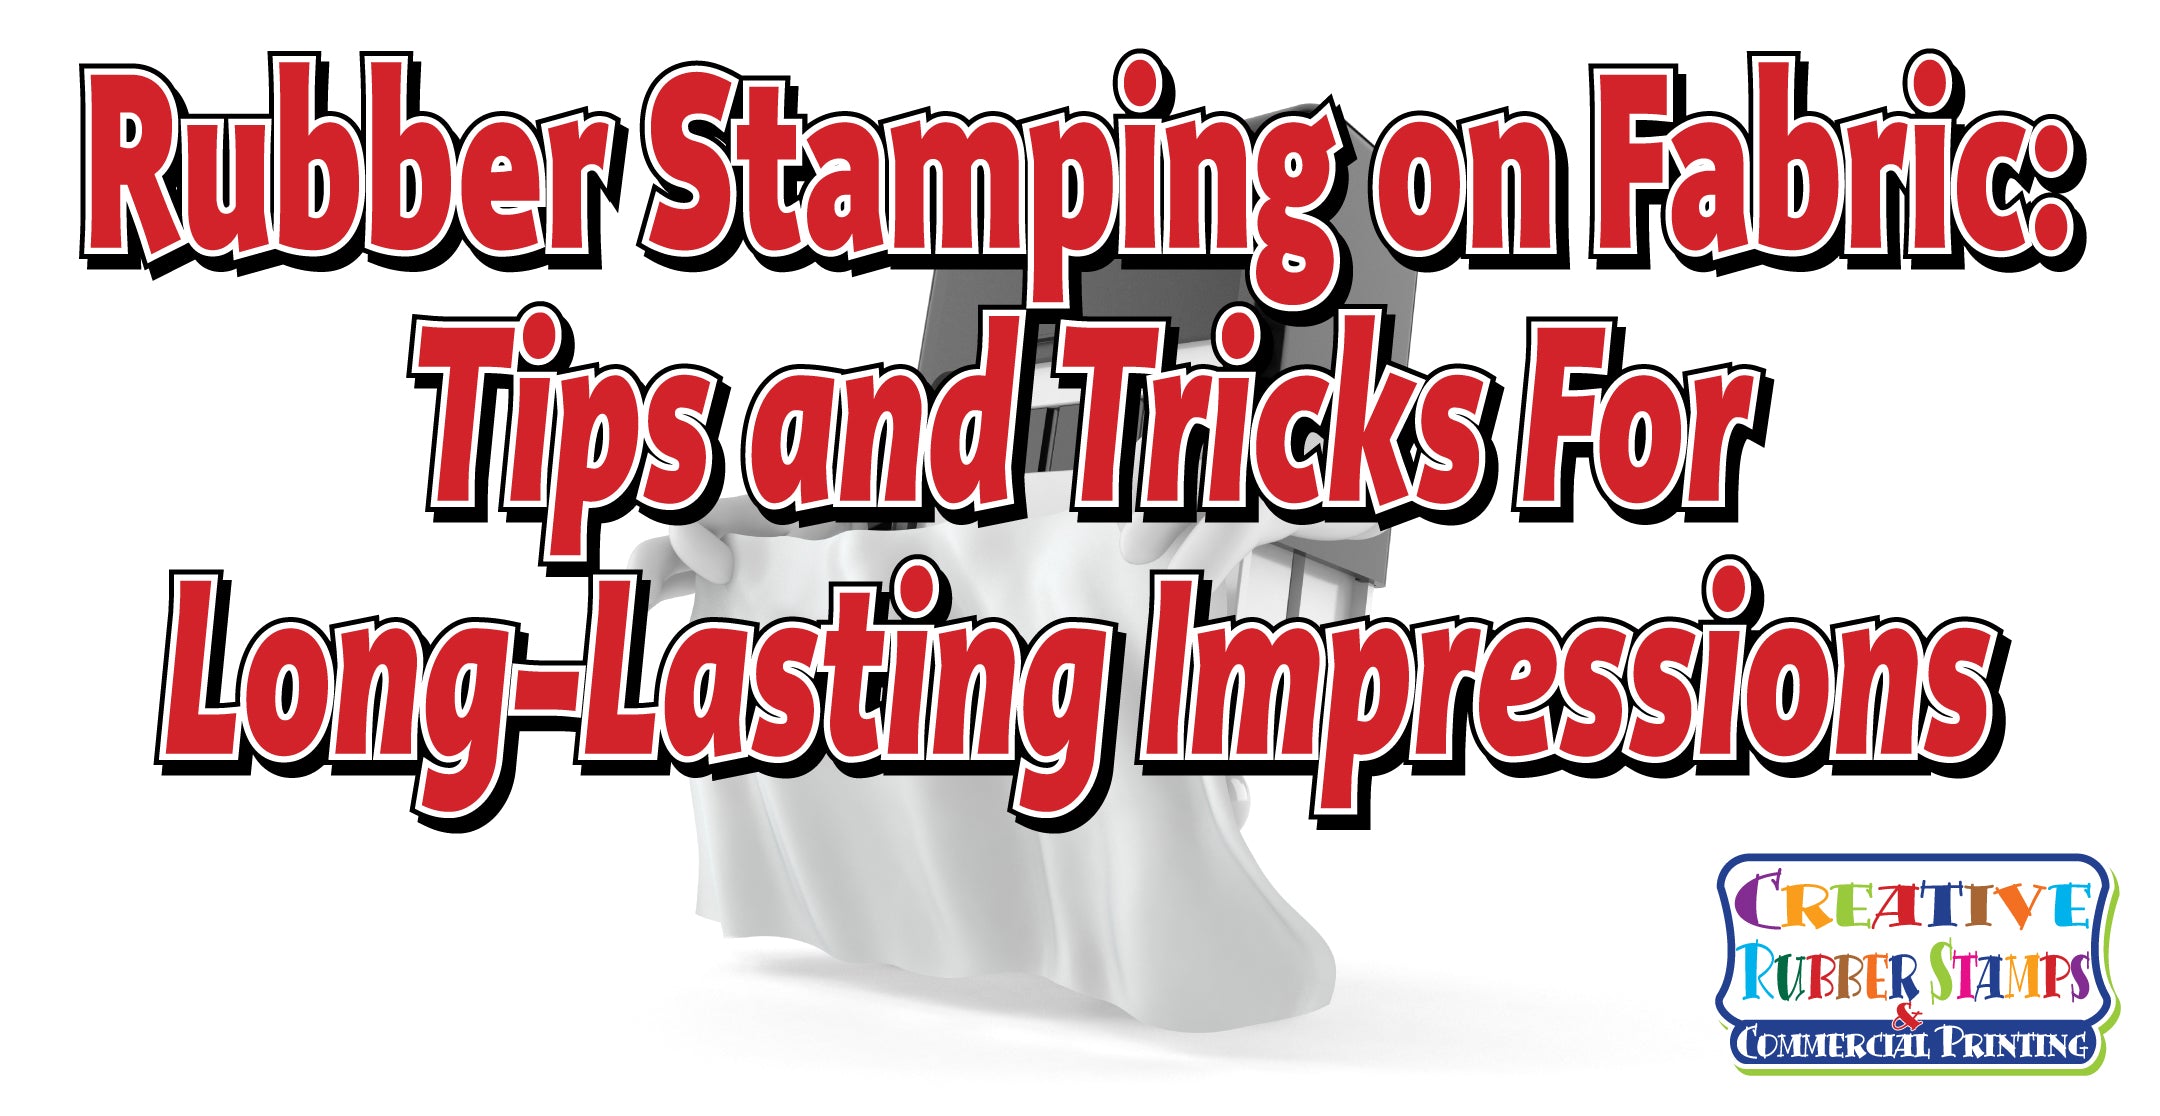 Rubber Stamping on Fabric: Tips and Tricks For Long-Lasting Impression –  Creative Rubber Stamps